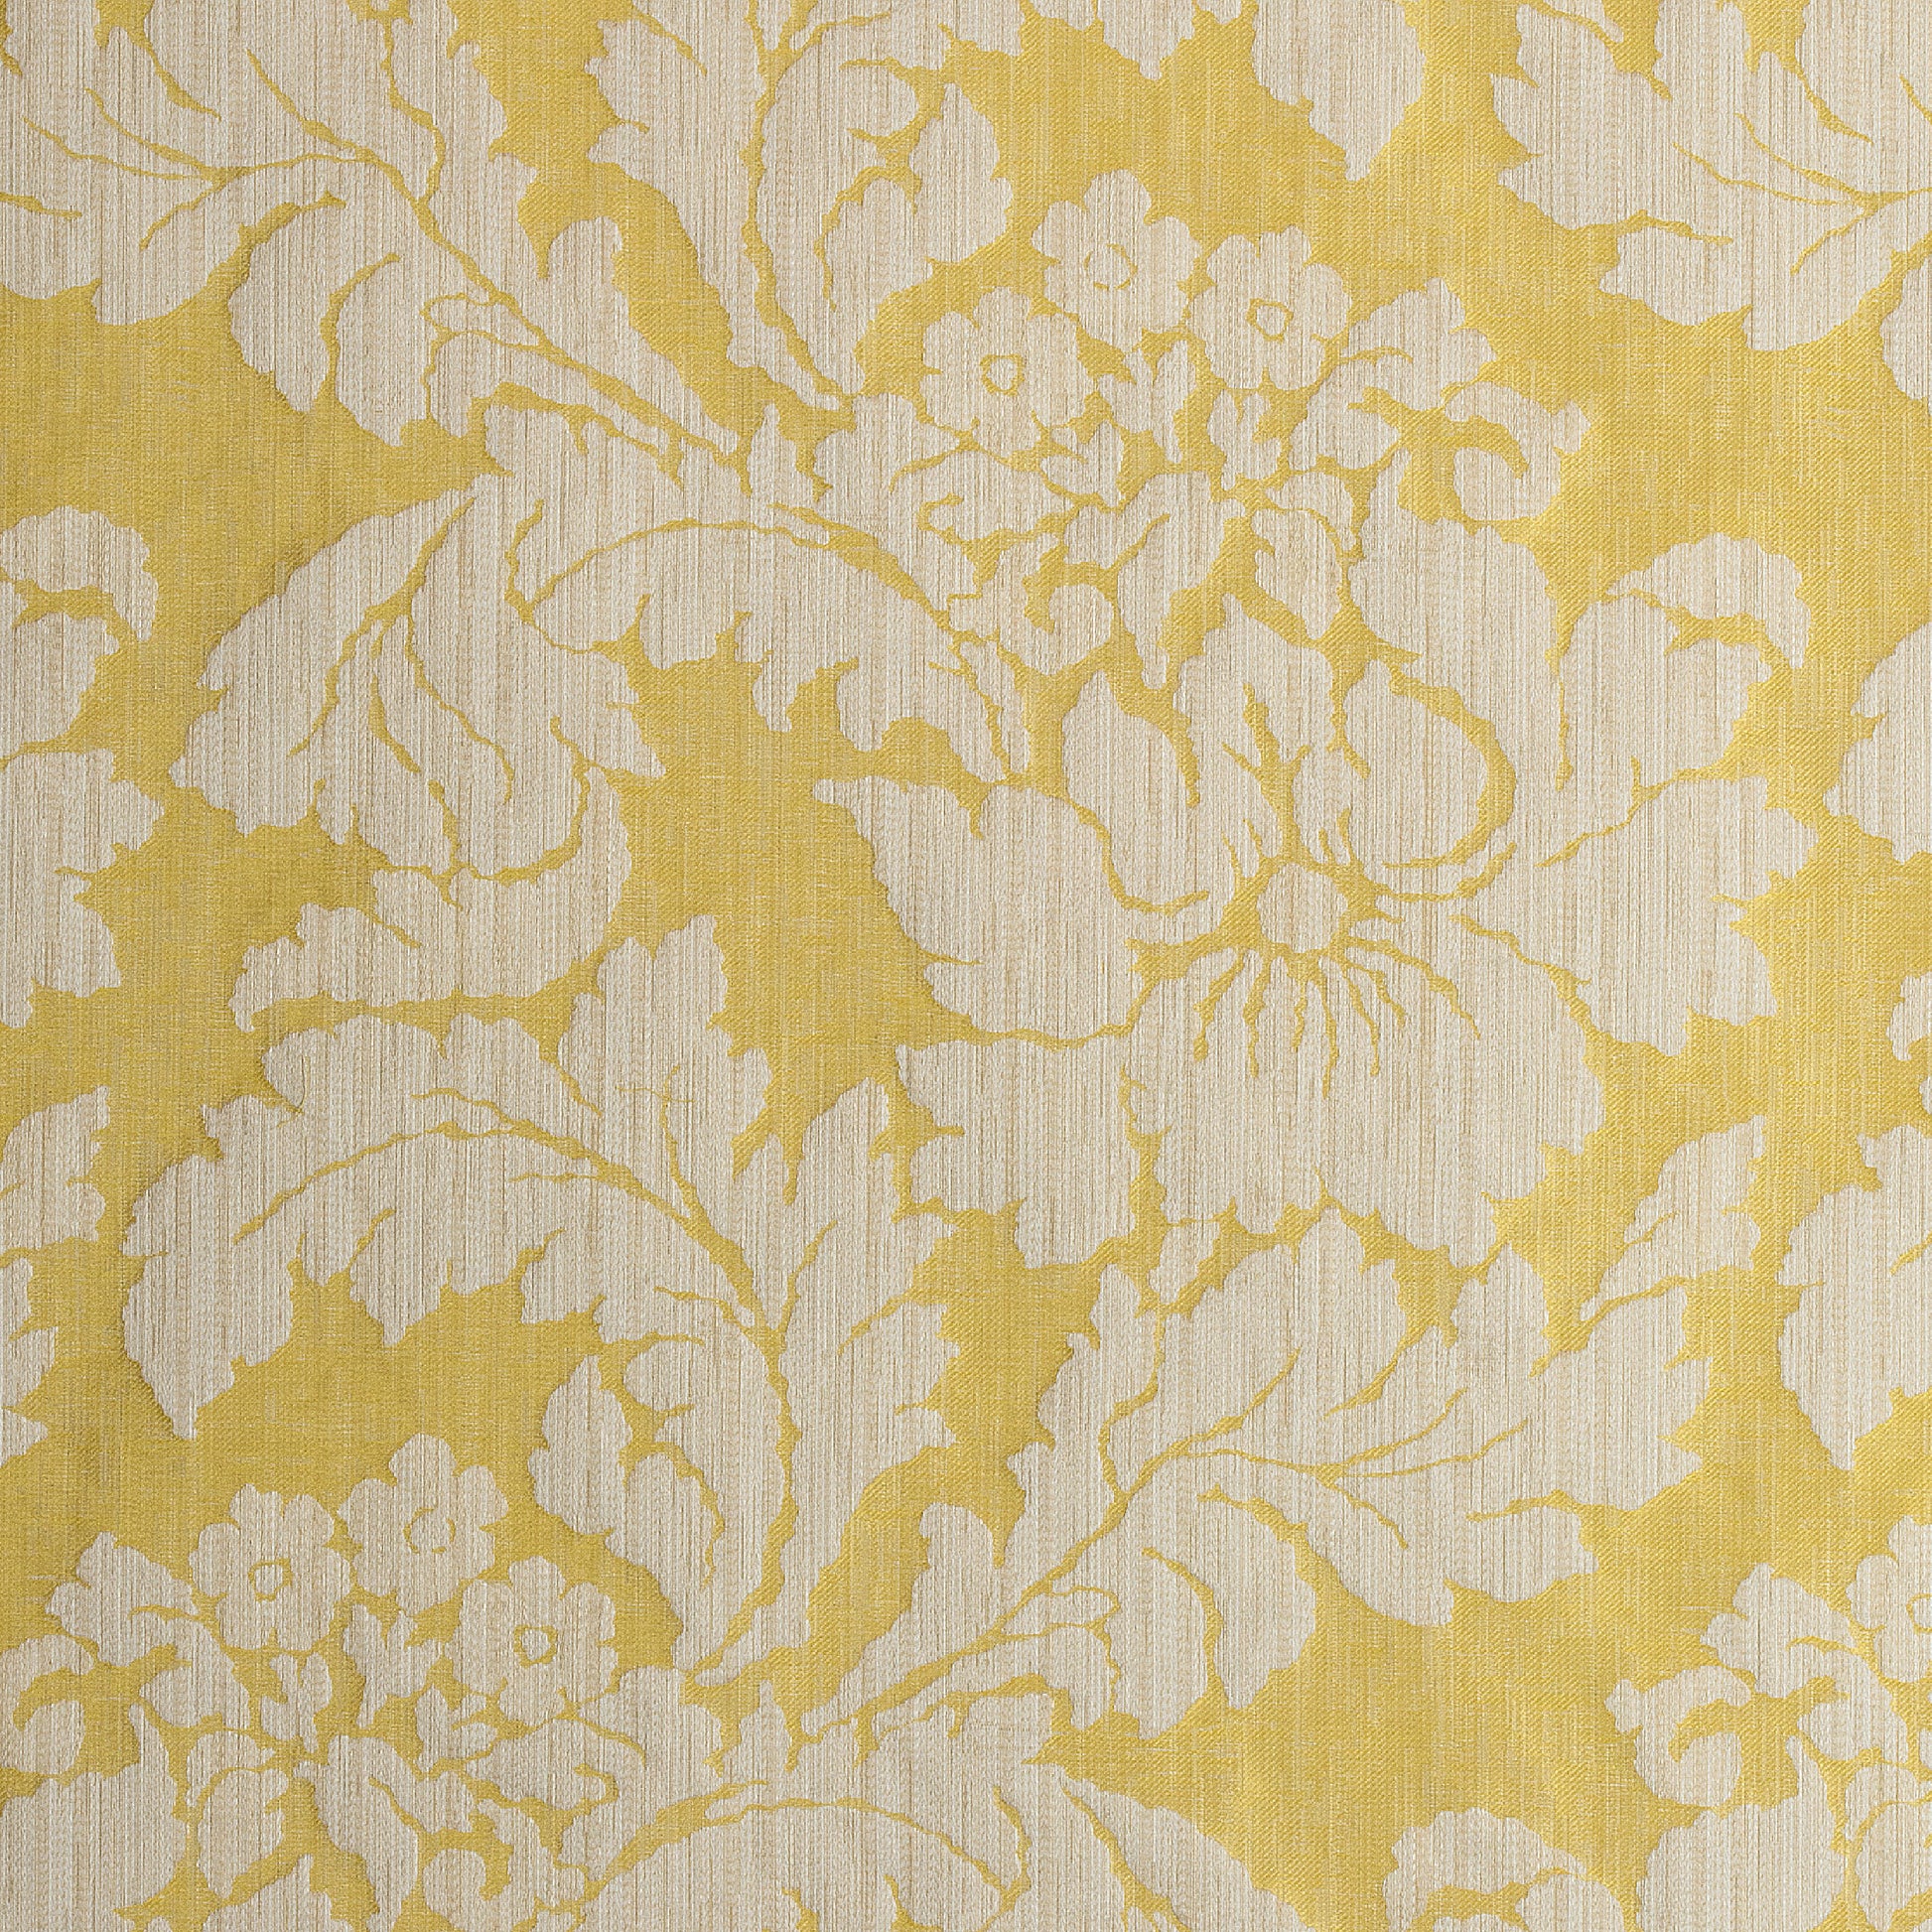 Purchase  Ann French Fabric Product# AW72981  pattern name  Caserta Damask